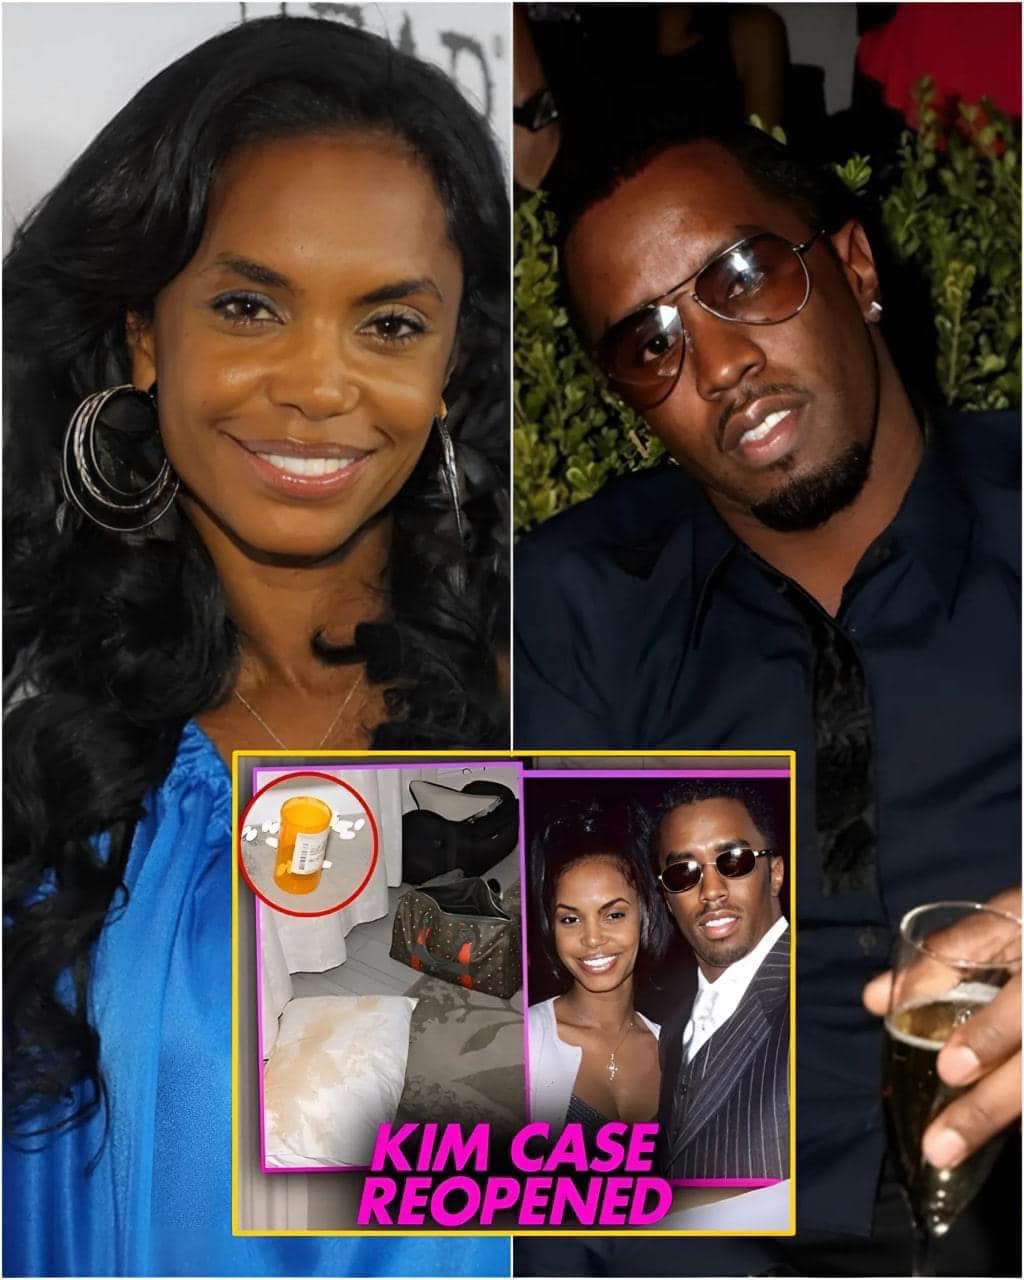 OMG! His eyebrows has devil horns on them! NEW EVIDENCE Diddy TOOK OUT Kim Porter For Threatening To EXPOSE HIM